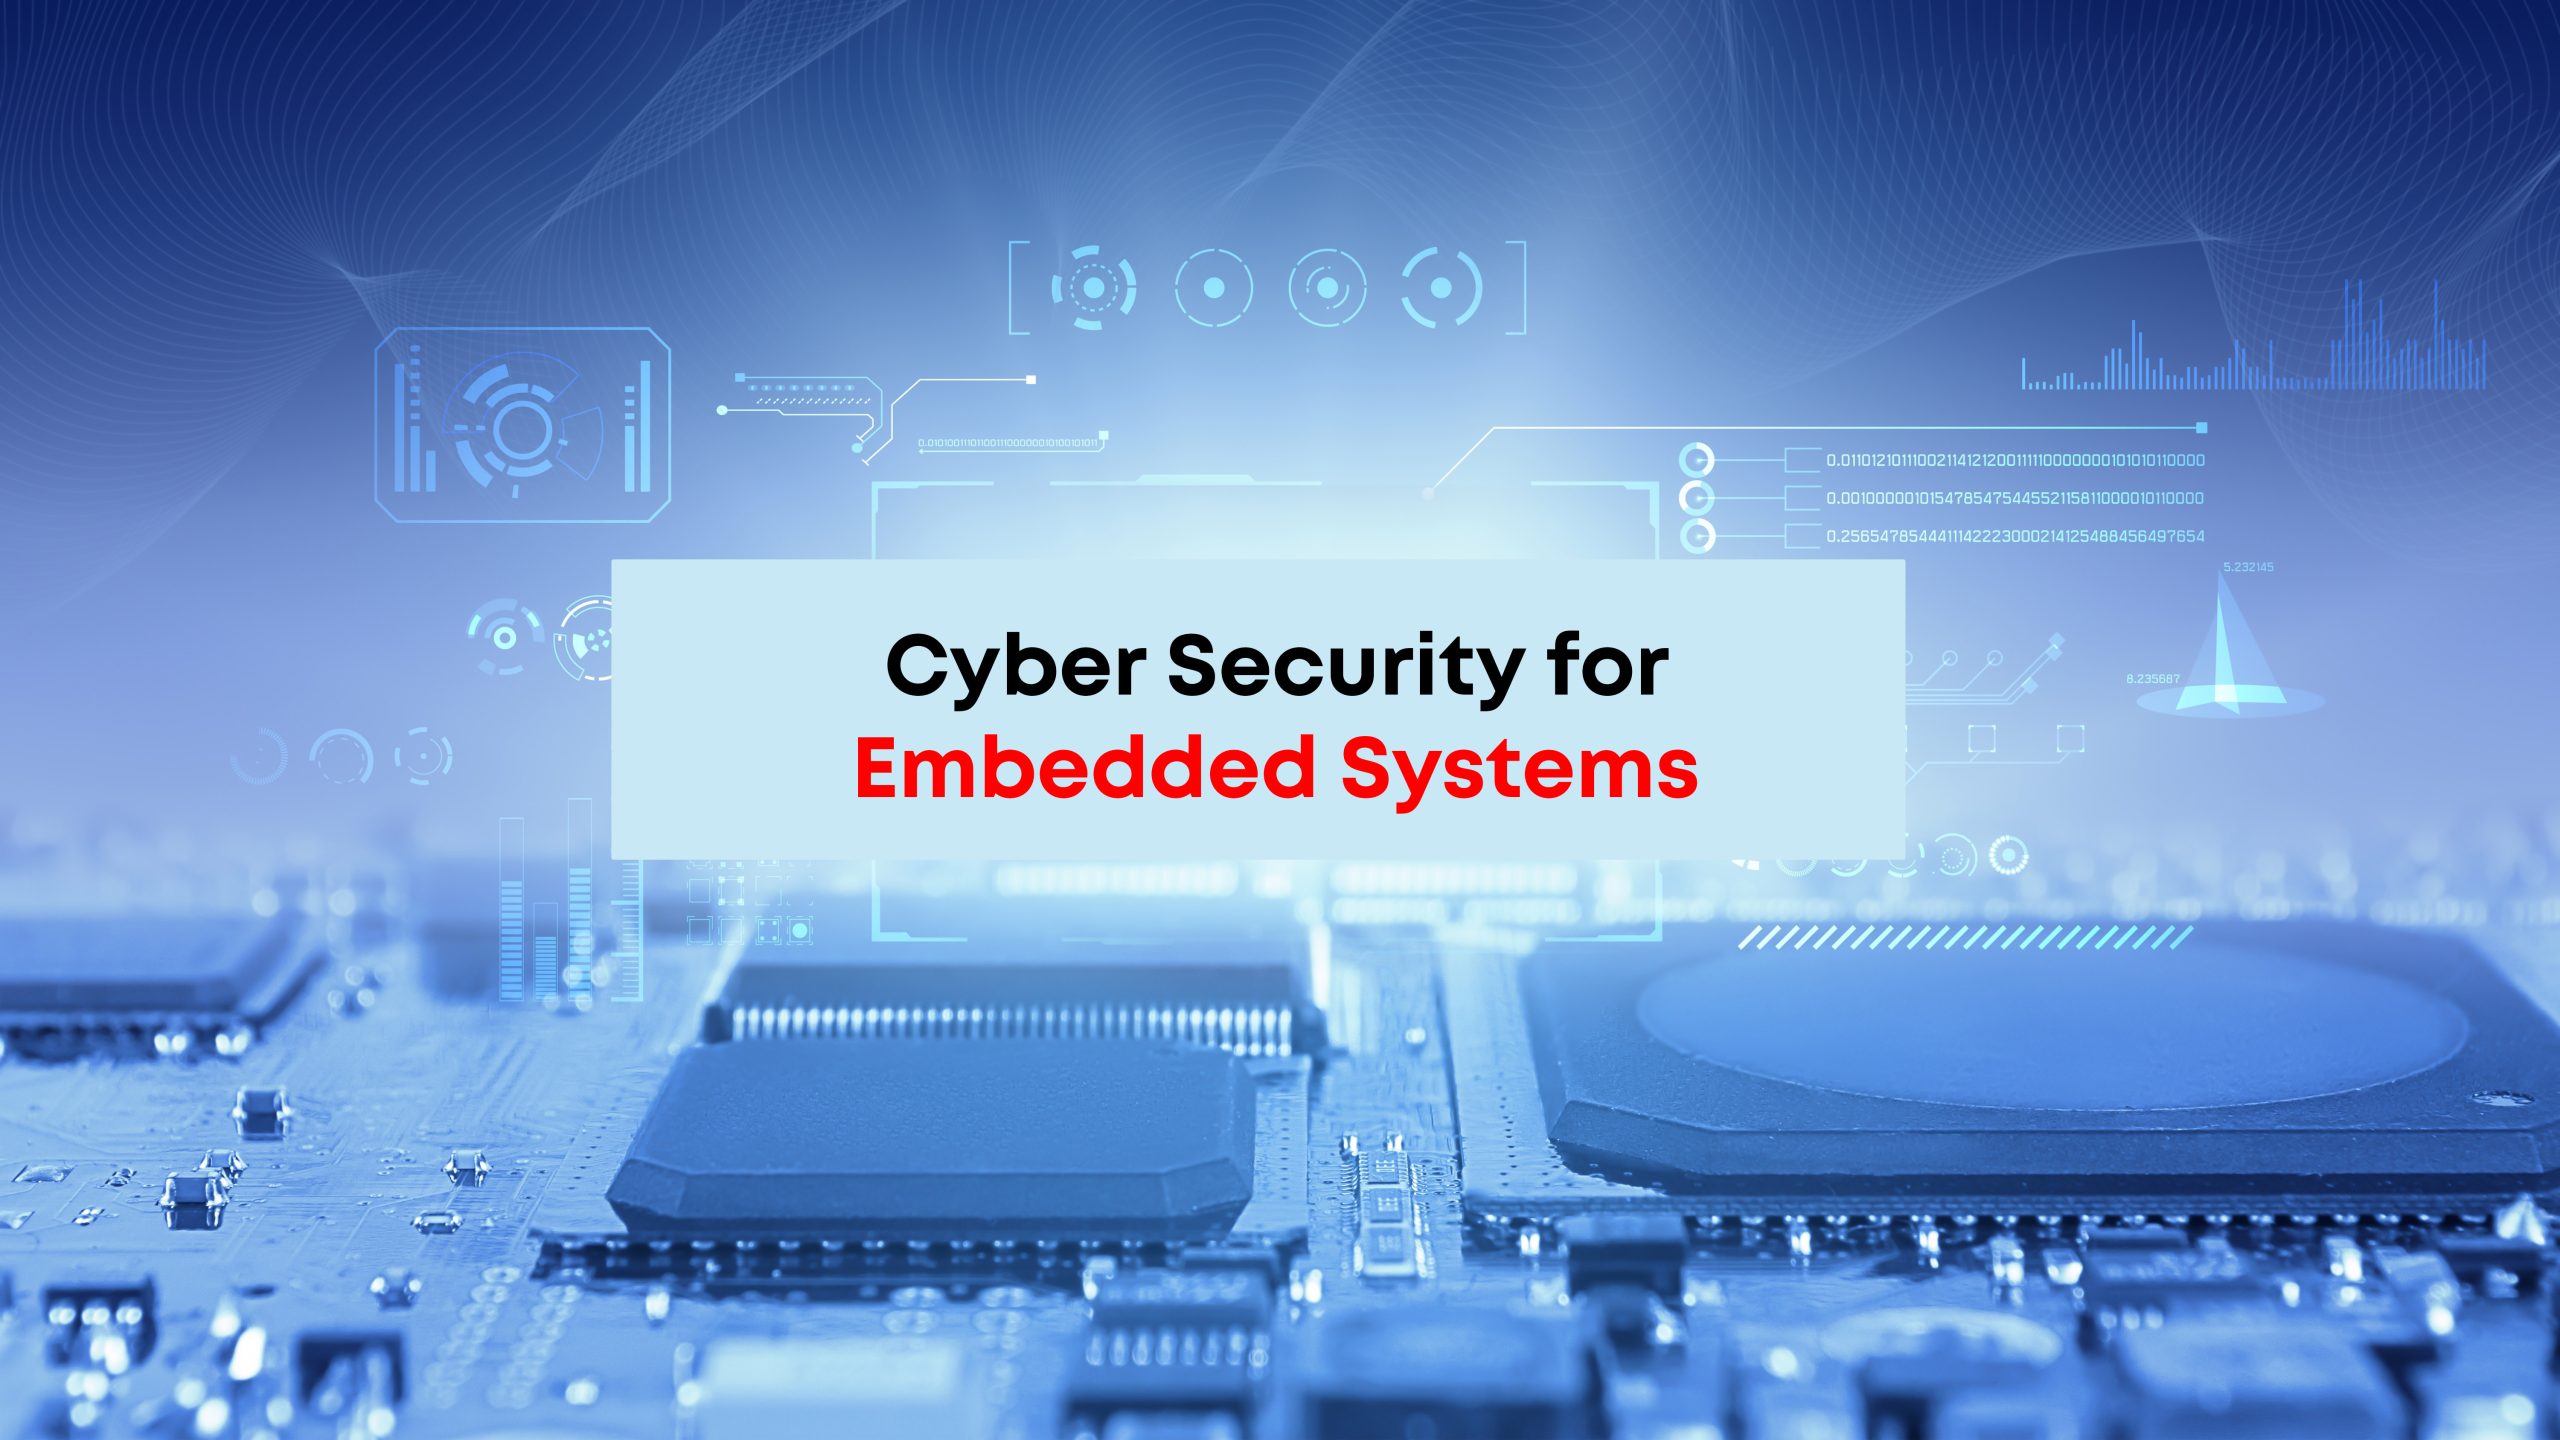 How to Secure Embedded Systems: A Short Guide to Cyber Security for Embedded Systems